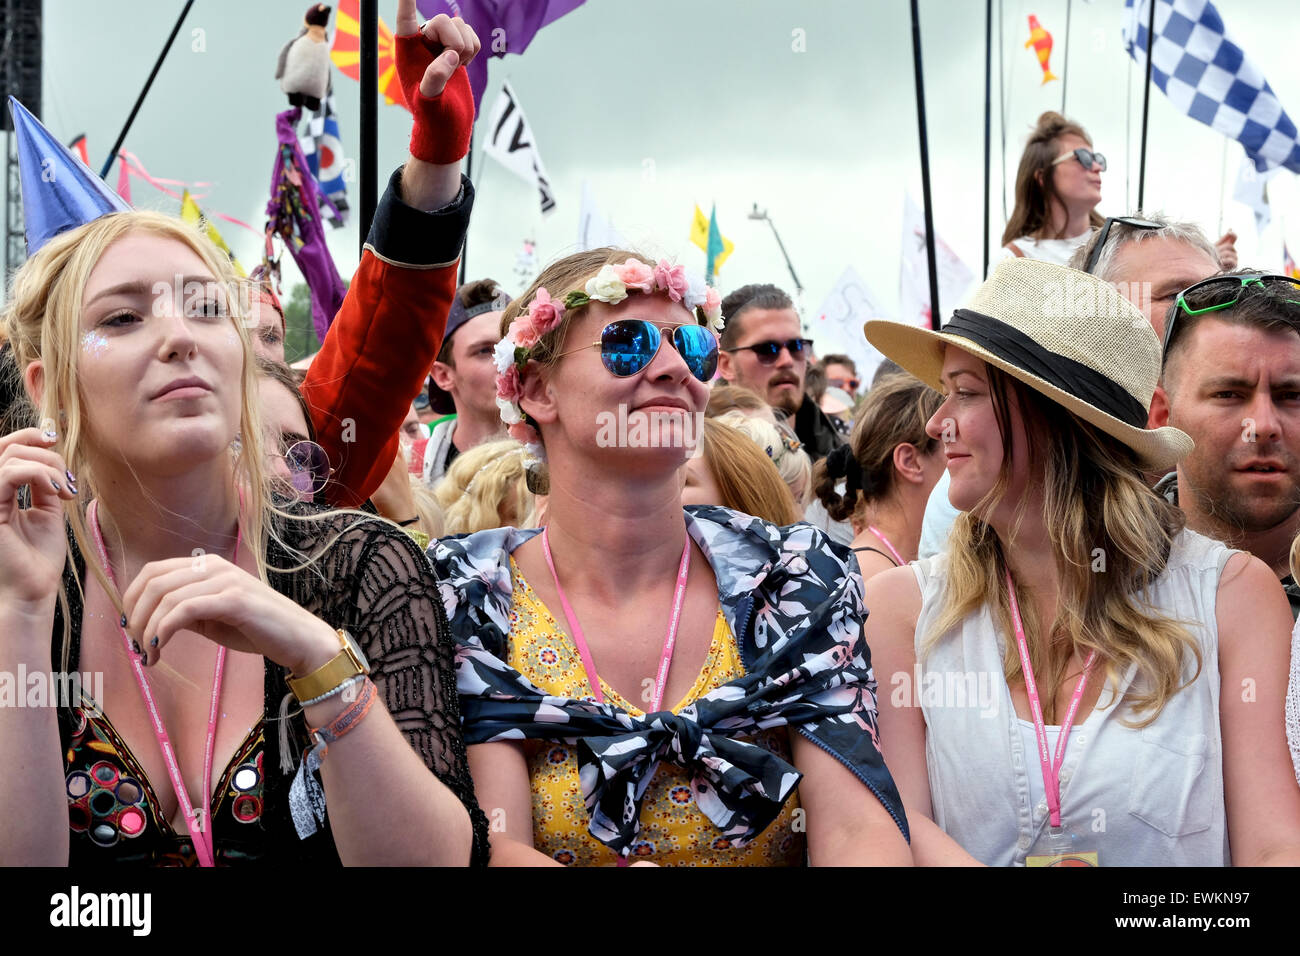 Glastonbury Festival, Somerset, UK. 28 June 2015. The crowd shows its appreciation as Lionel Richie performs live during his first ever British festival appearance in the traditional Sunday ÒlegendÓ spot  on the Pyramid Stage on Sunday at the 2015 Glastonbury Festival. Credit:  Tom Corban/Alamy Live News Stock Photo